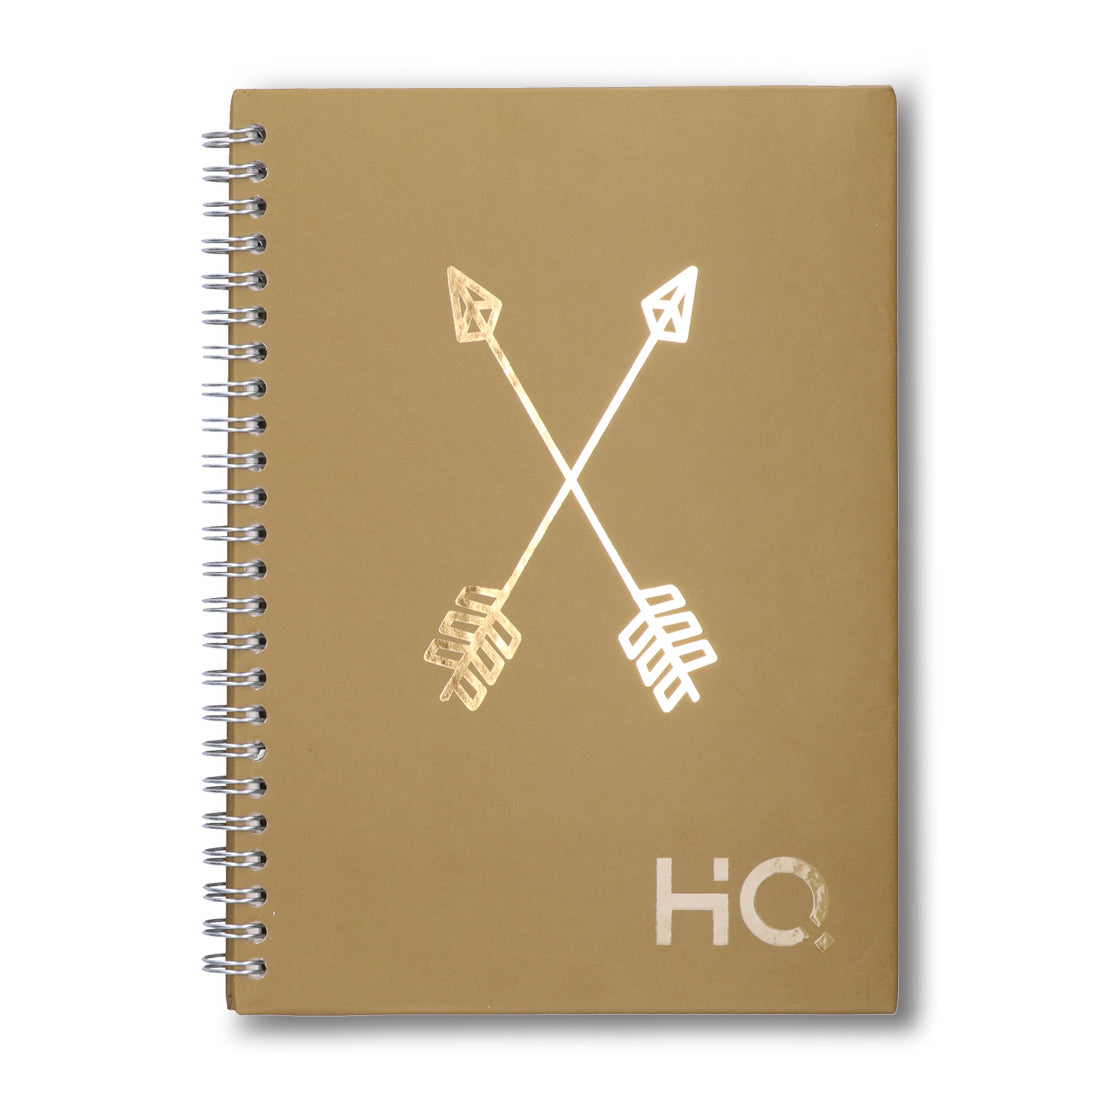 Navneet HQ | Hard Cover Notebook - Corporate Edge (Khaki) for Office and Professional Use | Wiro Bound and Foil Stamping | Single Line | A5 Size - 21 cm x 14.8 cm | 192 Pages